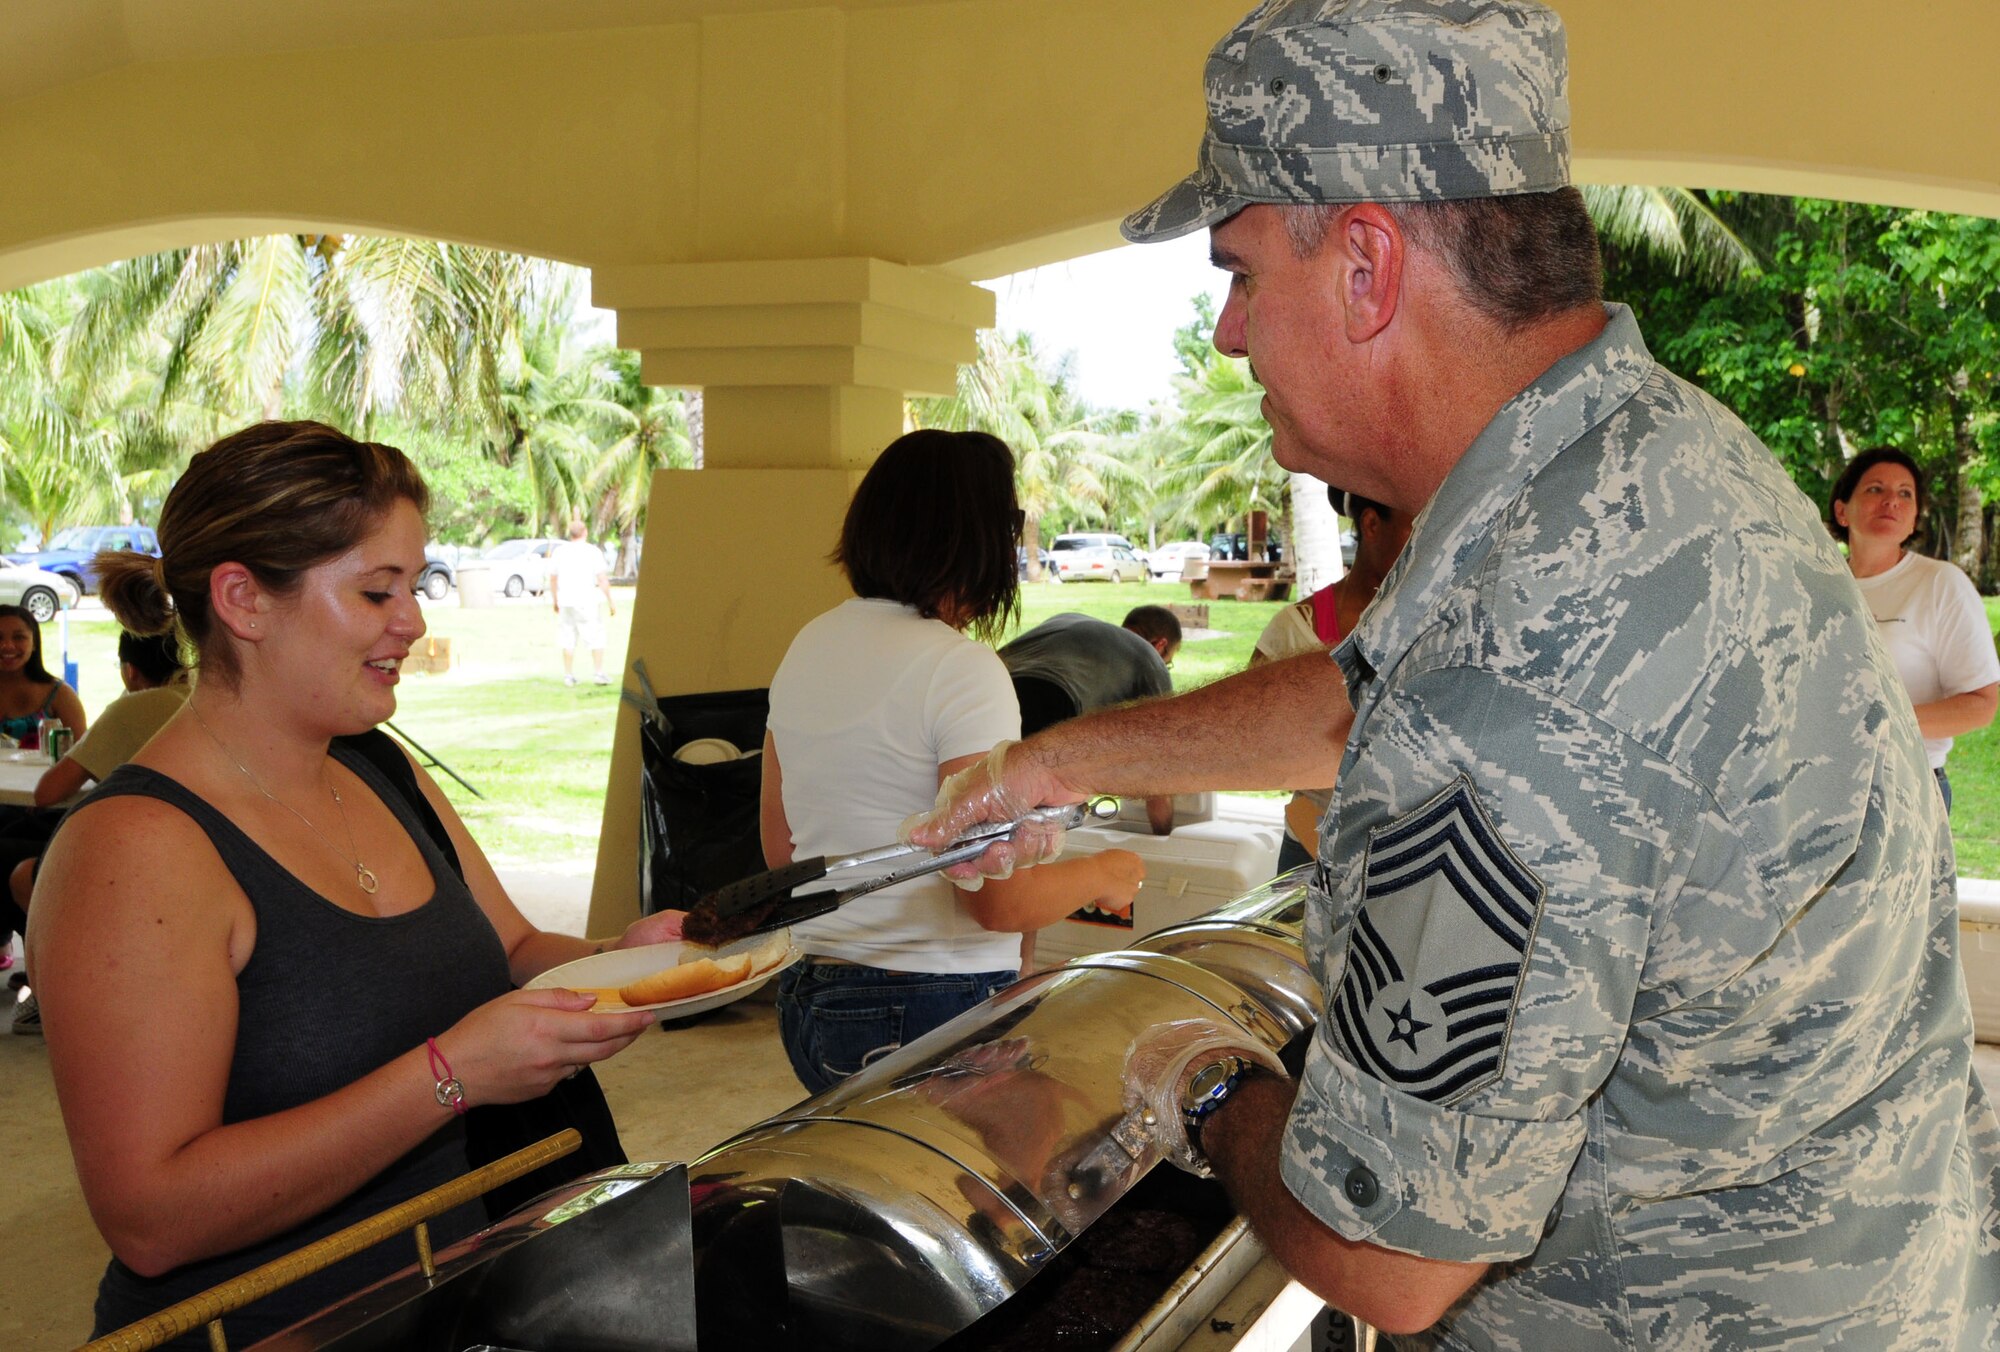 ANDERSEN AIR FORCE BASE, Guam - Chief Master Sgt. Tim Byrd, 36th Maintenance Group superintendent, serves a hamburger to Airman 1st Class Kristin Starkey, 36th Force Support Squadron, Oct. 9 at Tarague Beach pavilion here during Junior Enlisted Appreciation Day. Team Andersen chiefs served Airmen as their way of giving back to the junior enlisted personnel. (U.S. Air Force photo by Airman 1st Class Julian North)
